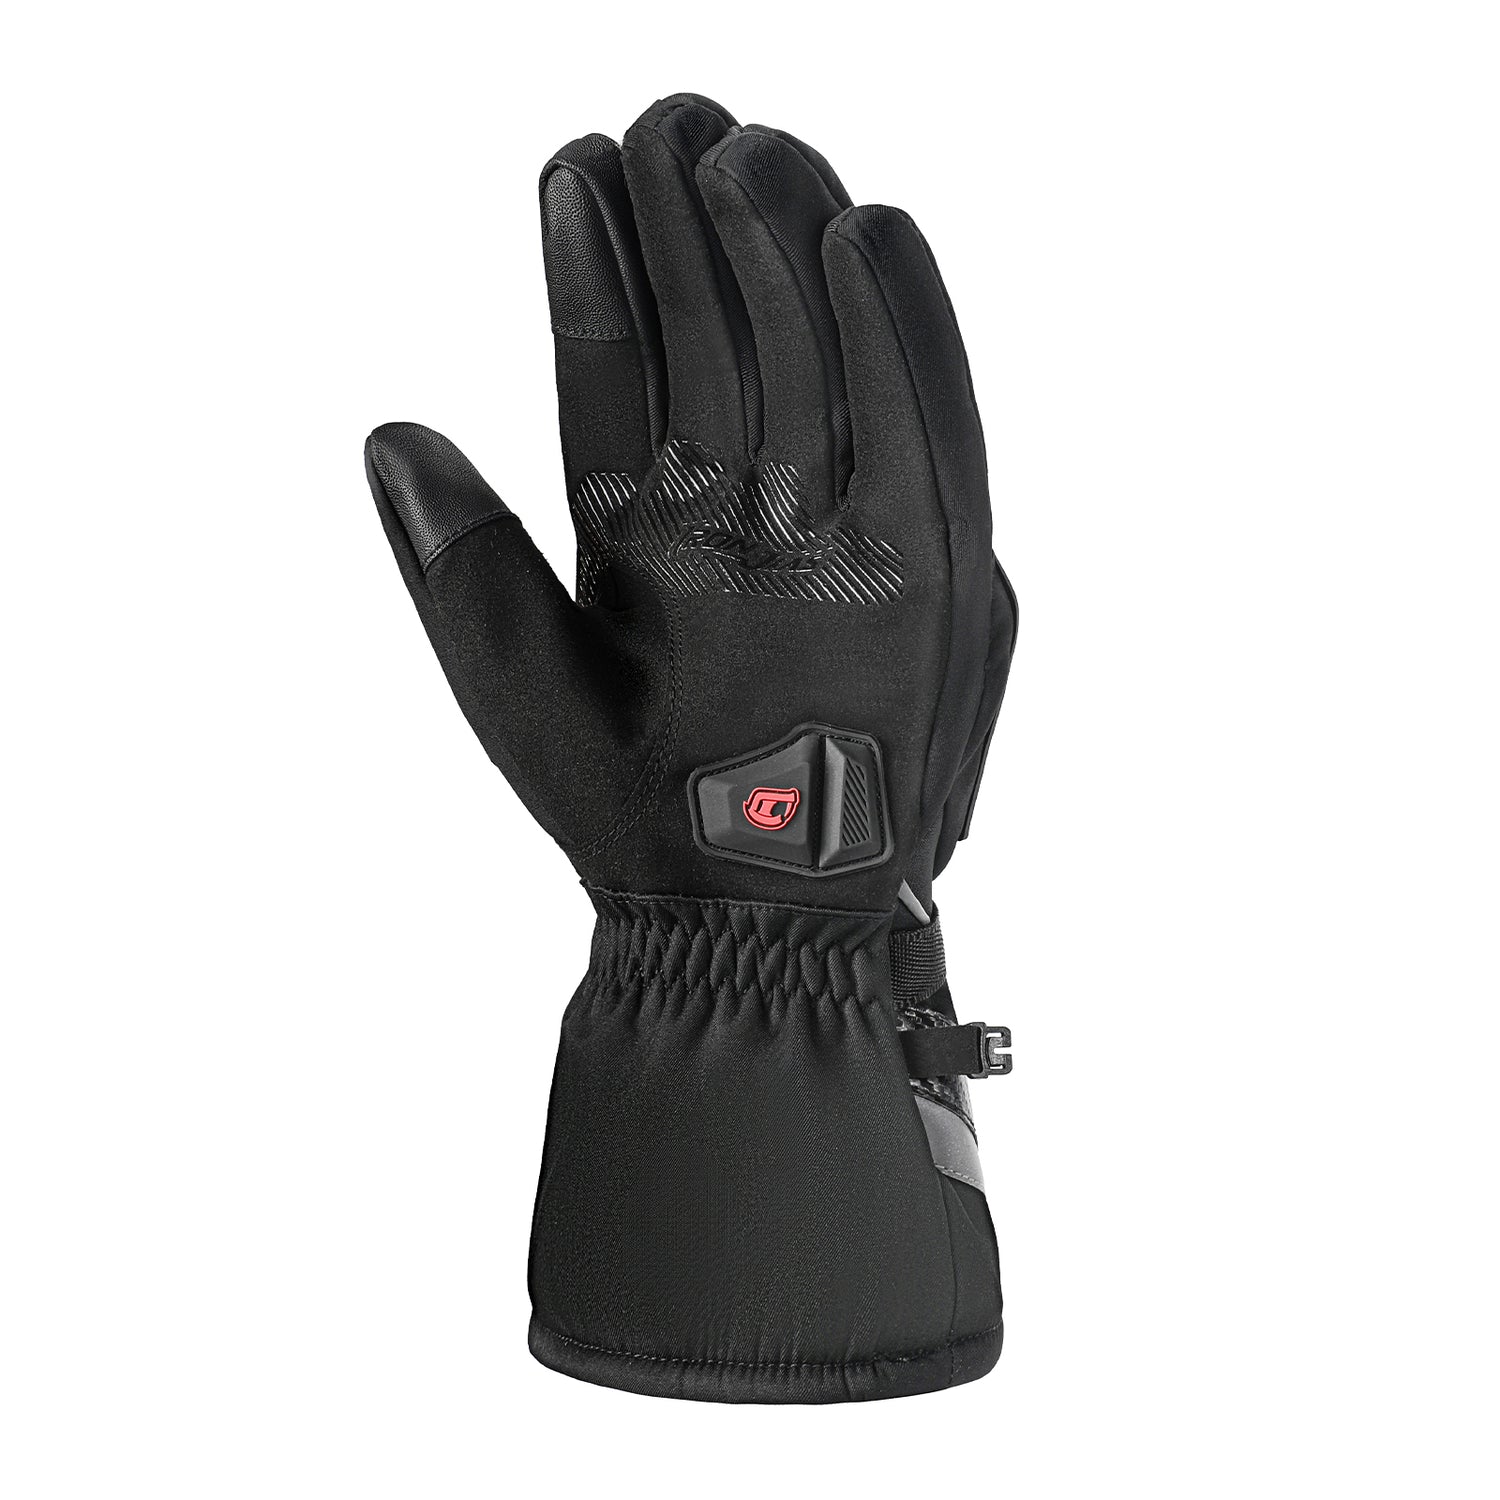 IRON JIA'S Heated Motorcycle Gloves, 7.4V Rechargeable Battery Electric  Heated Gloves, Waterproof Touchscreen Winter Cold Weather Glove with